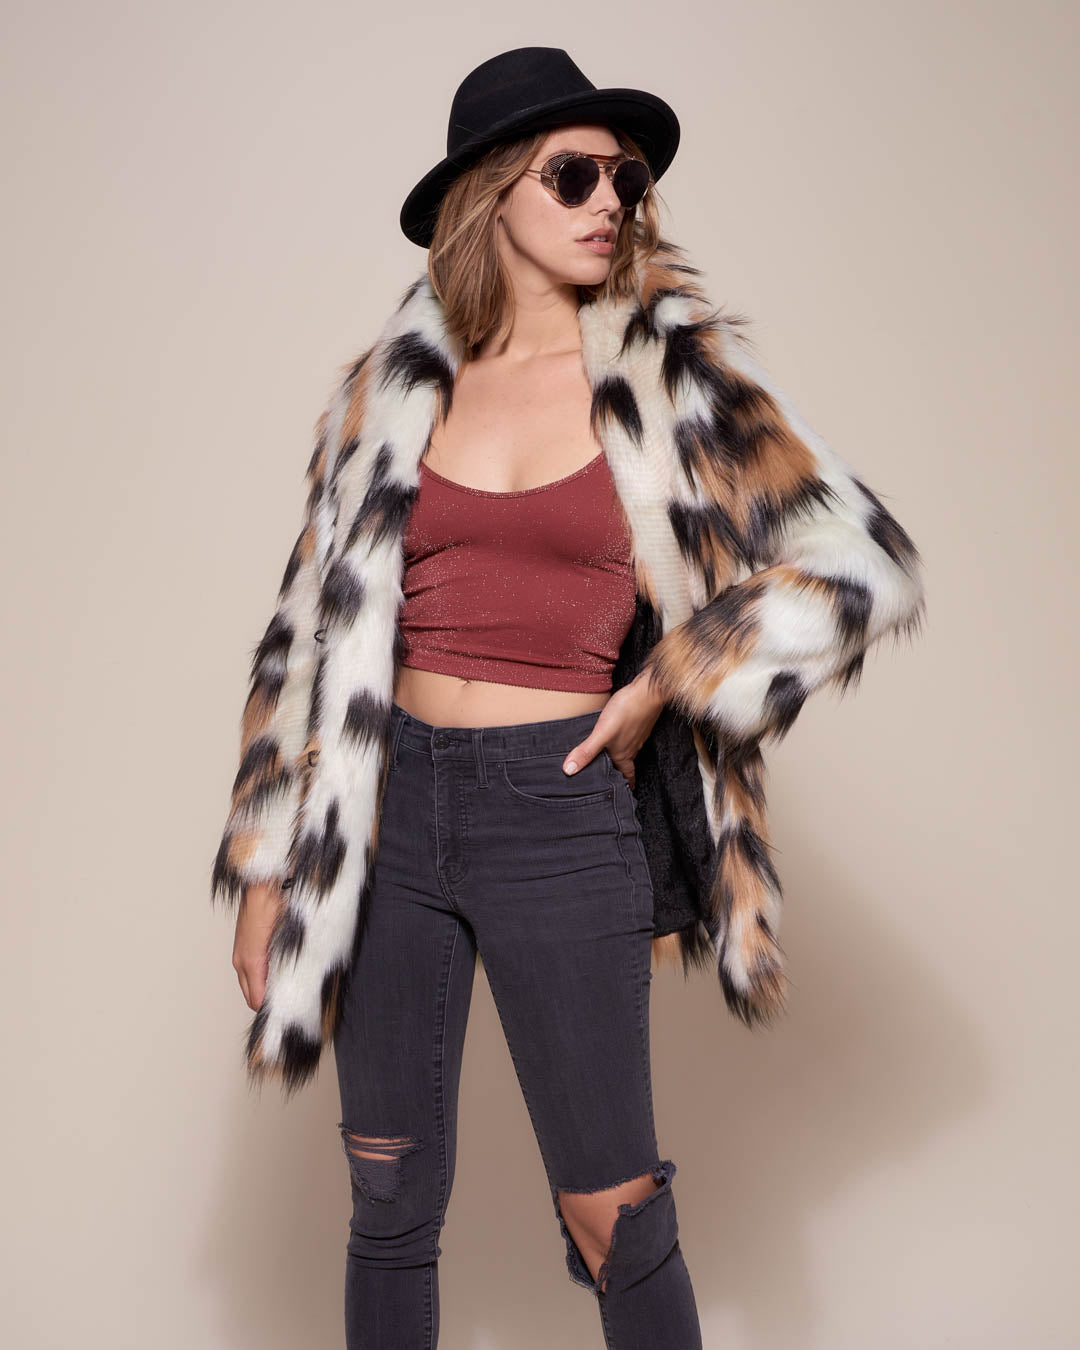 Faux Fur Coat with Collar on Woman with Manx Cat Design